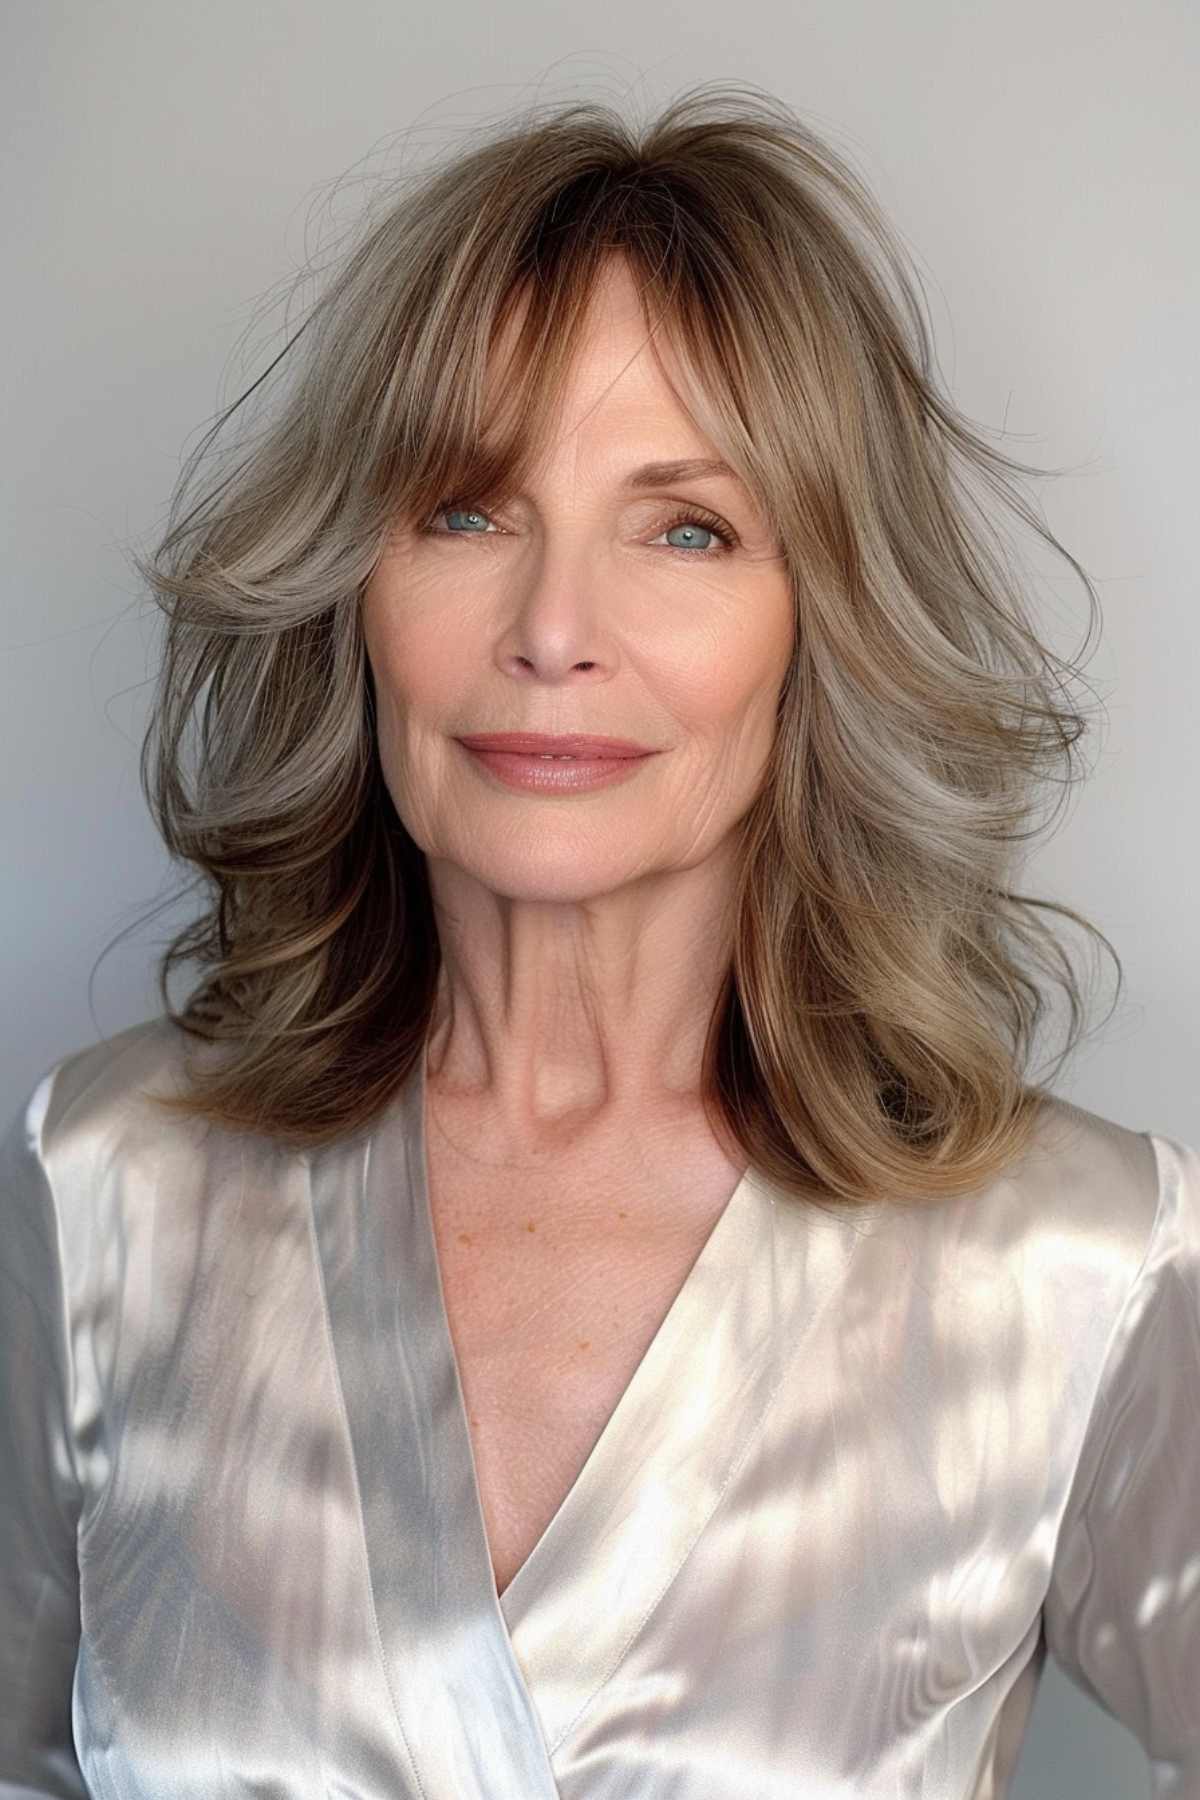 Mature woman with soft curtain bangs and layered mid-length hairstyle, in a satin blouse.